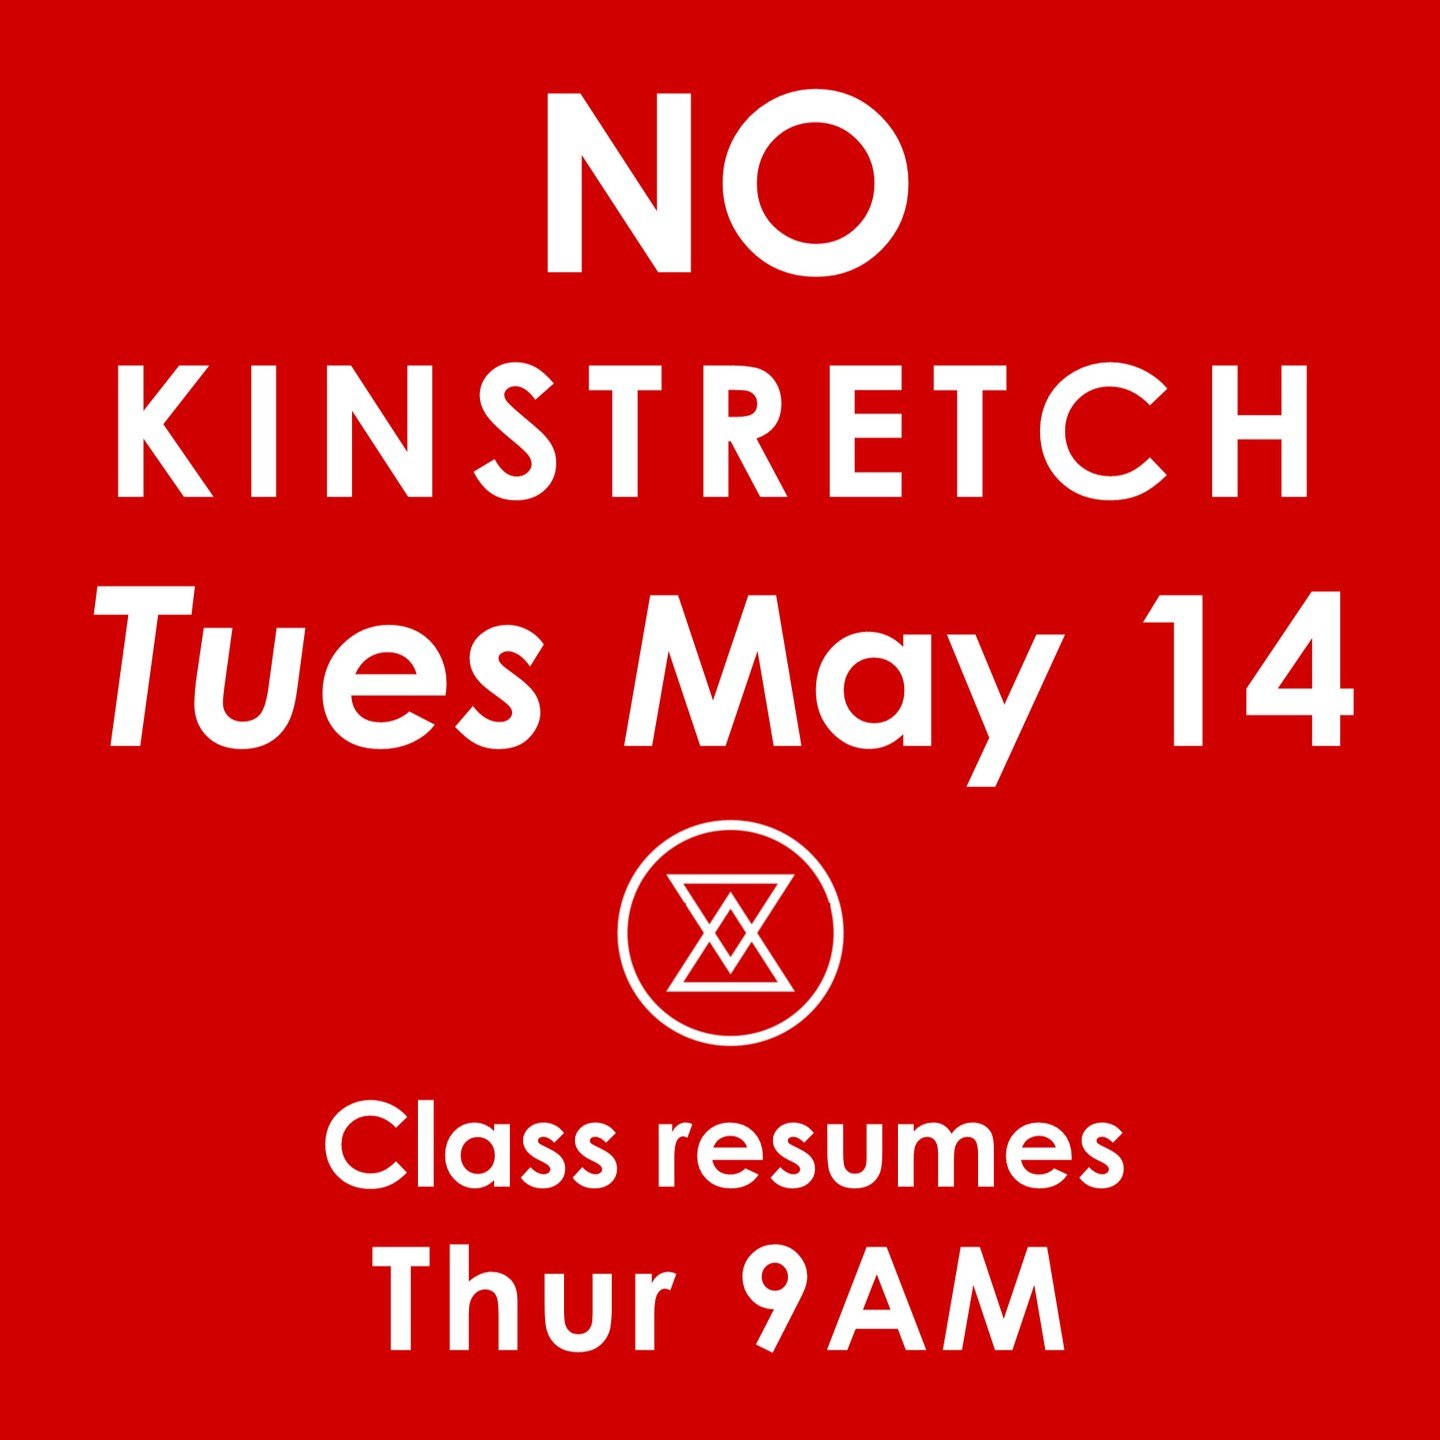 Hey gang,
No Kinstretch class this Tuesday, May 14. We will be out of the office. Class resumes Thursday, May 16 at 9AM.

Our normal schedule:
Sun 12PM
Mon 9AM
Tue 9AM
Thu 9AM and 6:15PM

excelsiorbodywork.com/kinstretch

#kinstretch